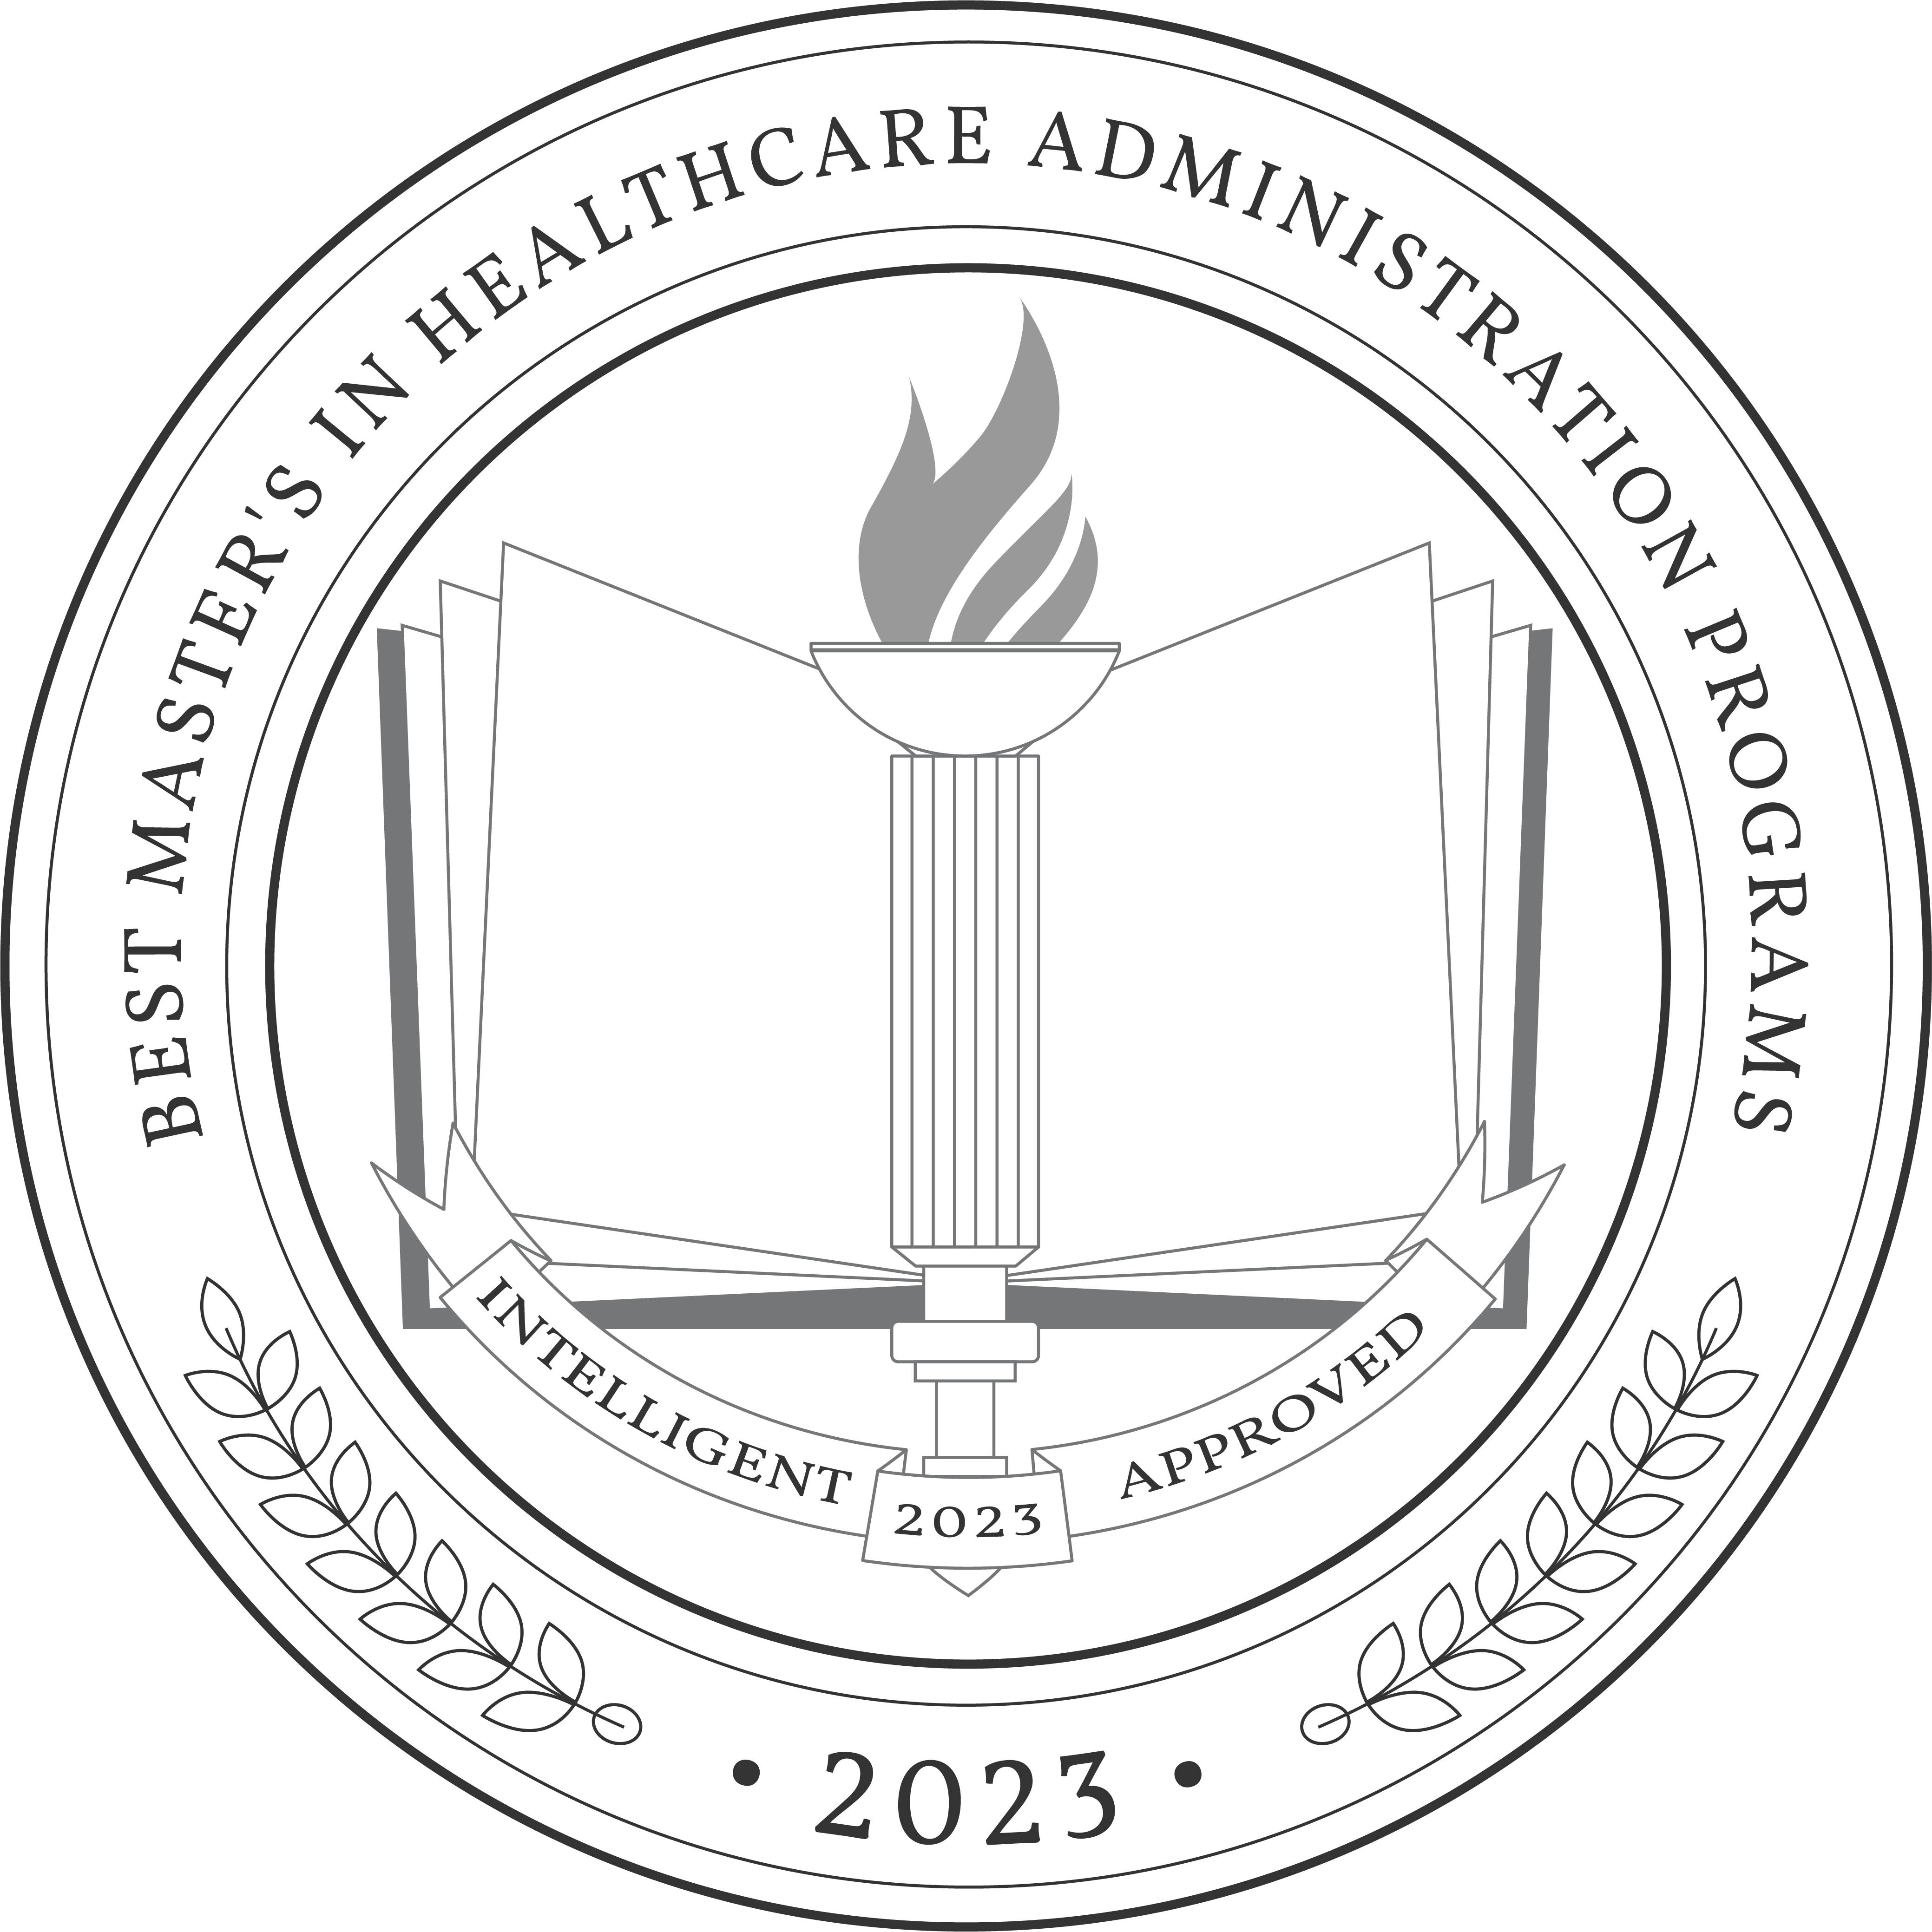 Best Master's in Healthcare Administration Programs 2023